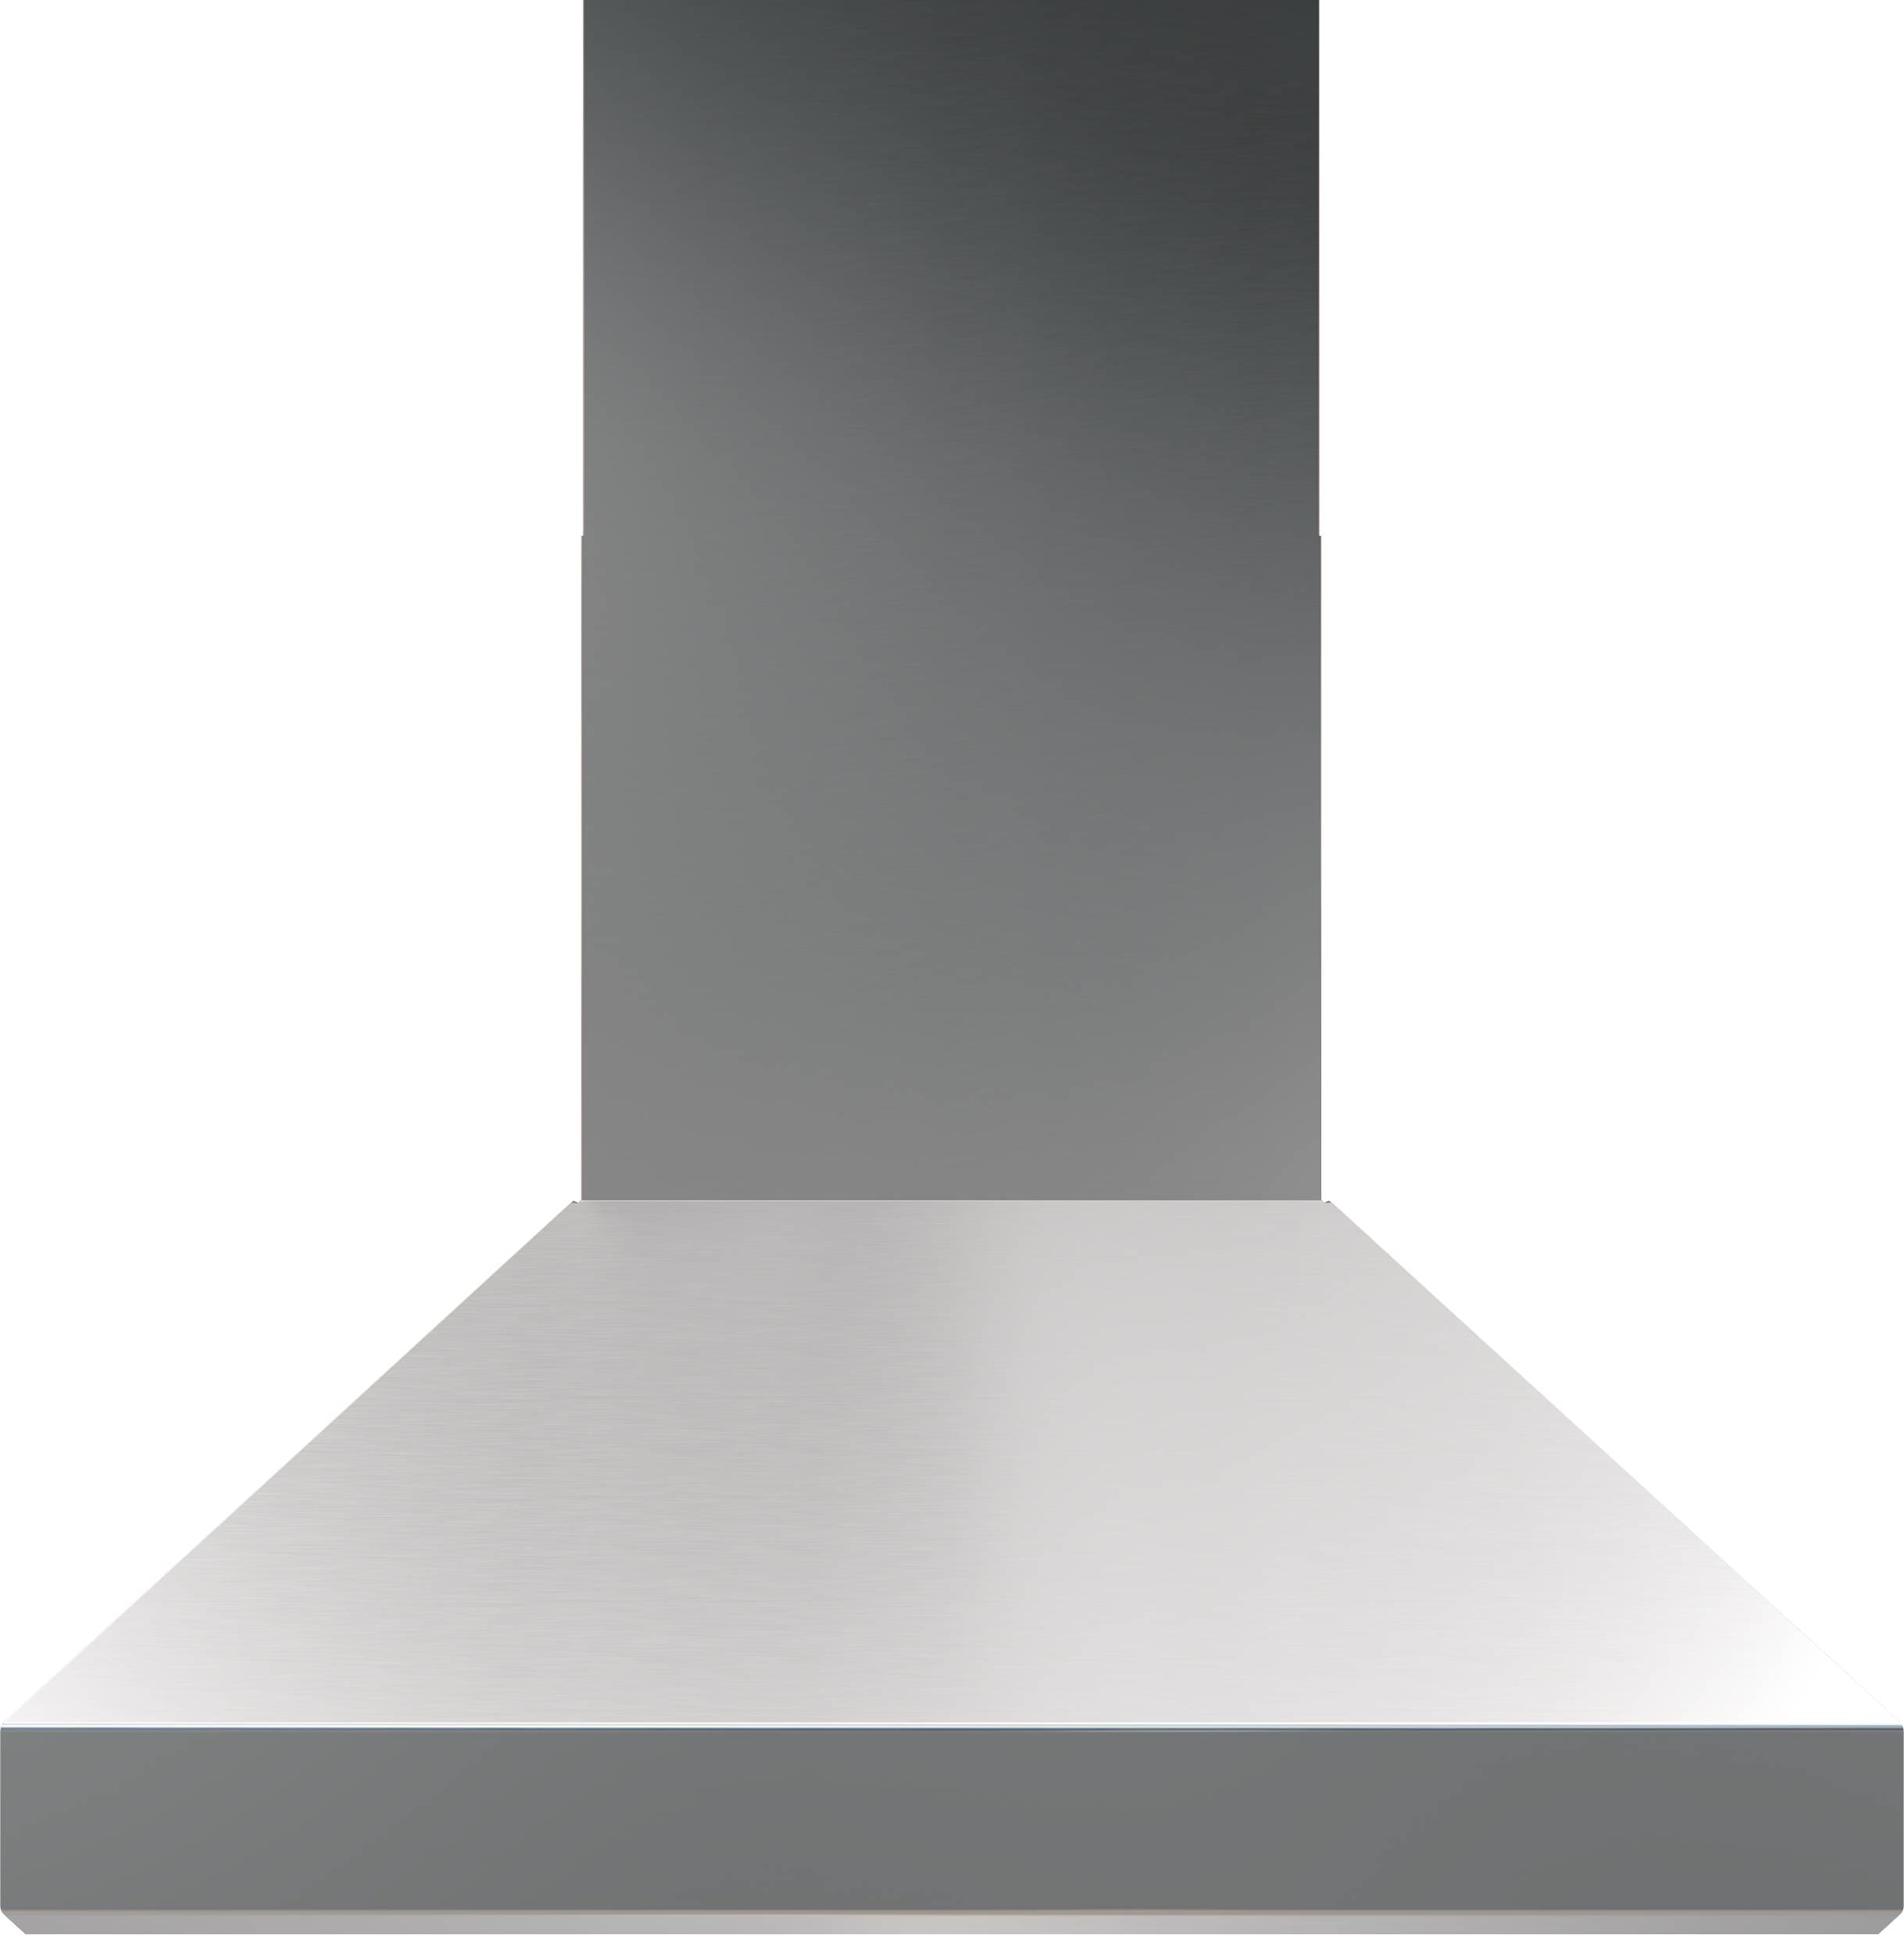 Zephyr Wall-Mounted Range Hoods at Lowes.com